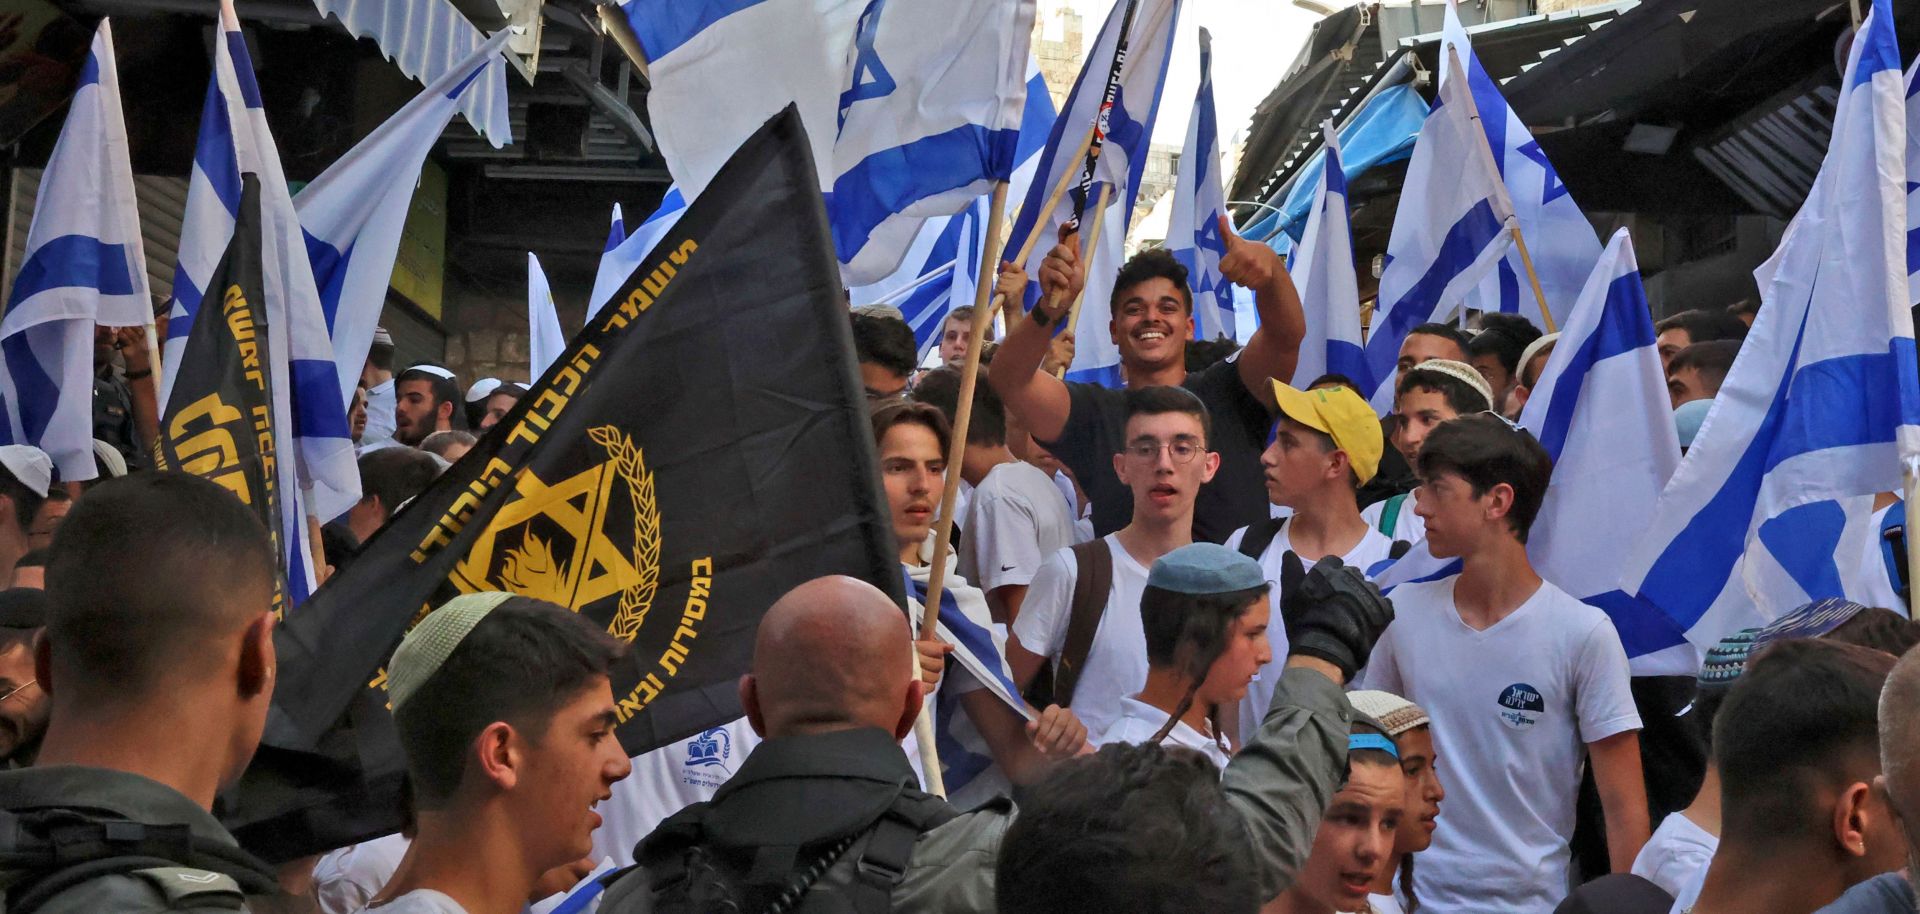 Demonstrators wave the Israeli flag and the banner of the far-right Jewish group "Lehava" (Flame) gather for the "Flag March" on May 29, 2022, marking "Jerusalem Day" in the Old City of Jerusalem.